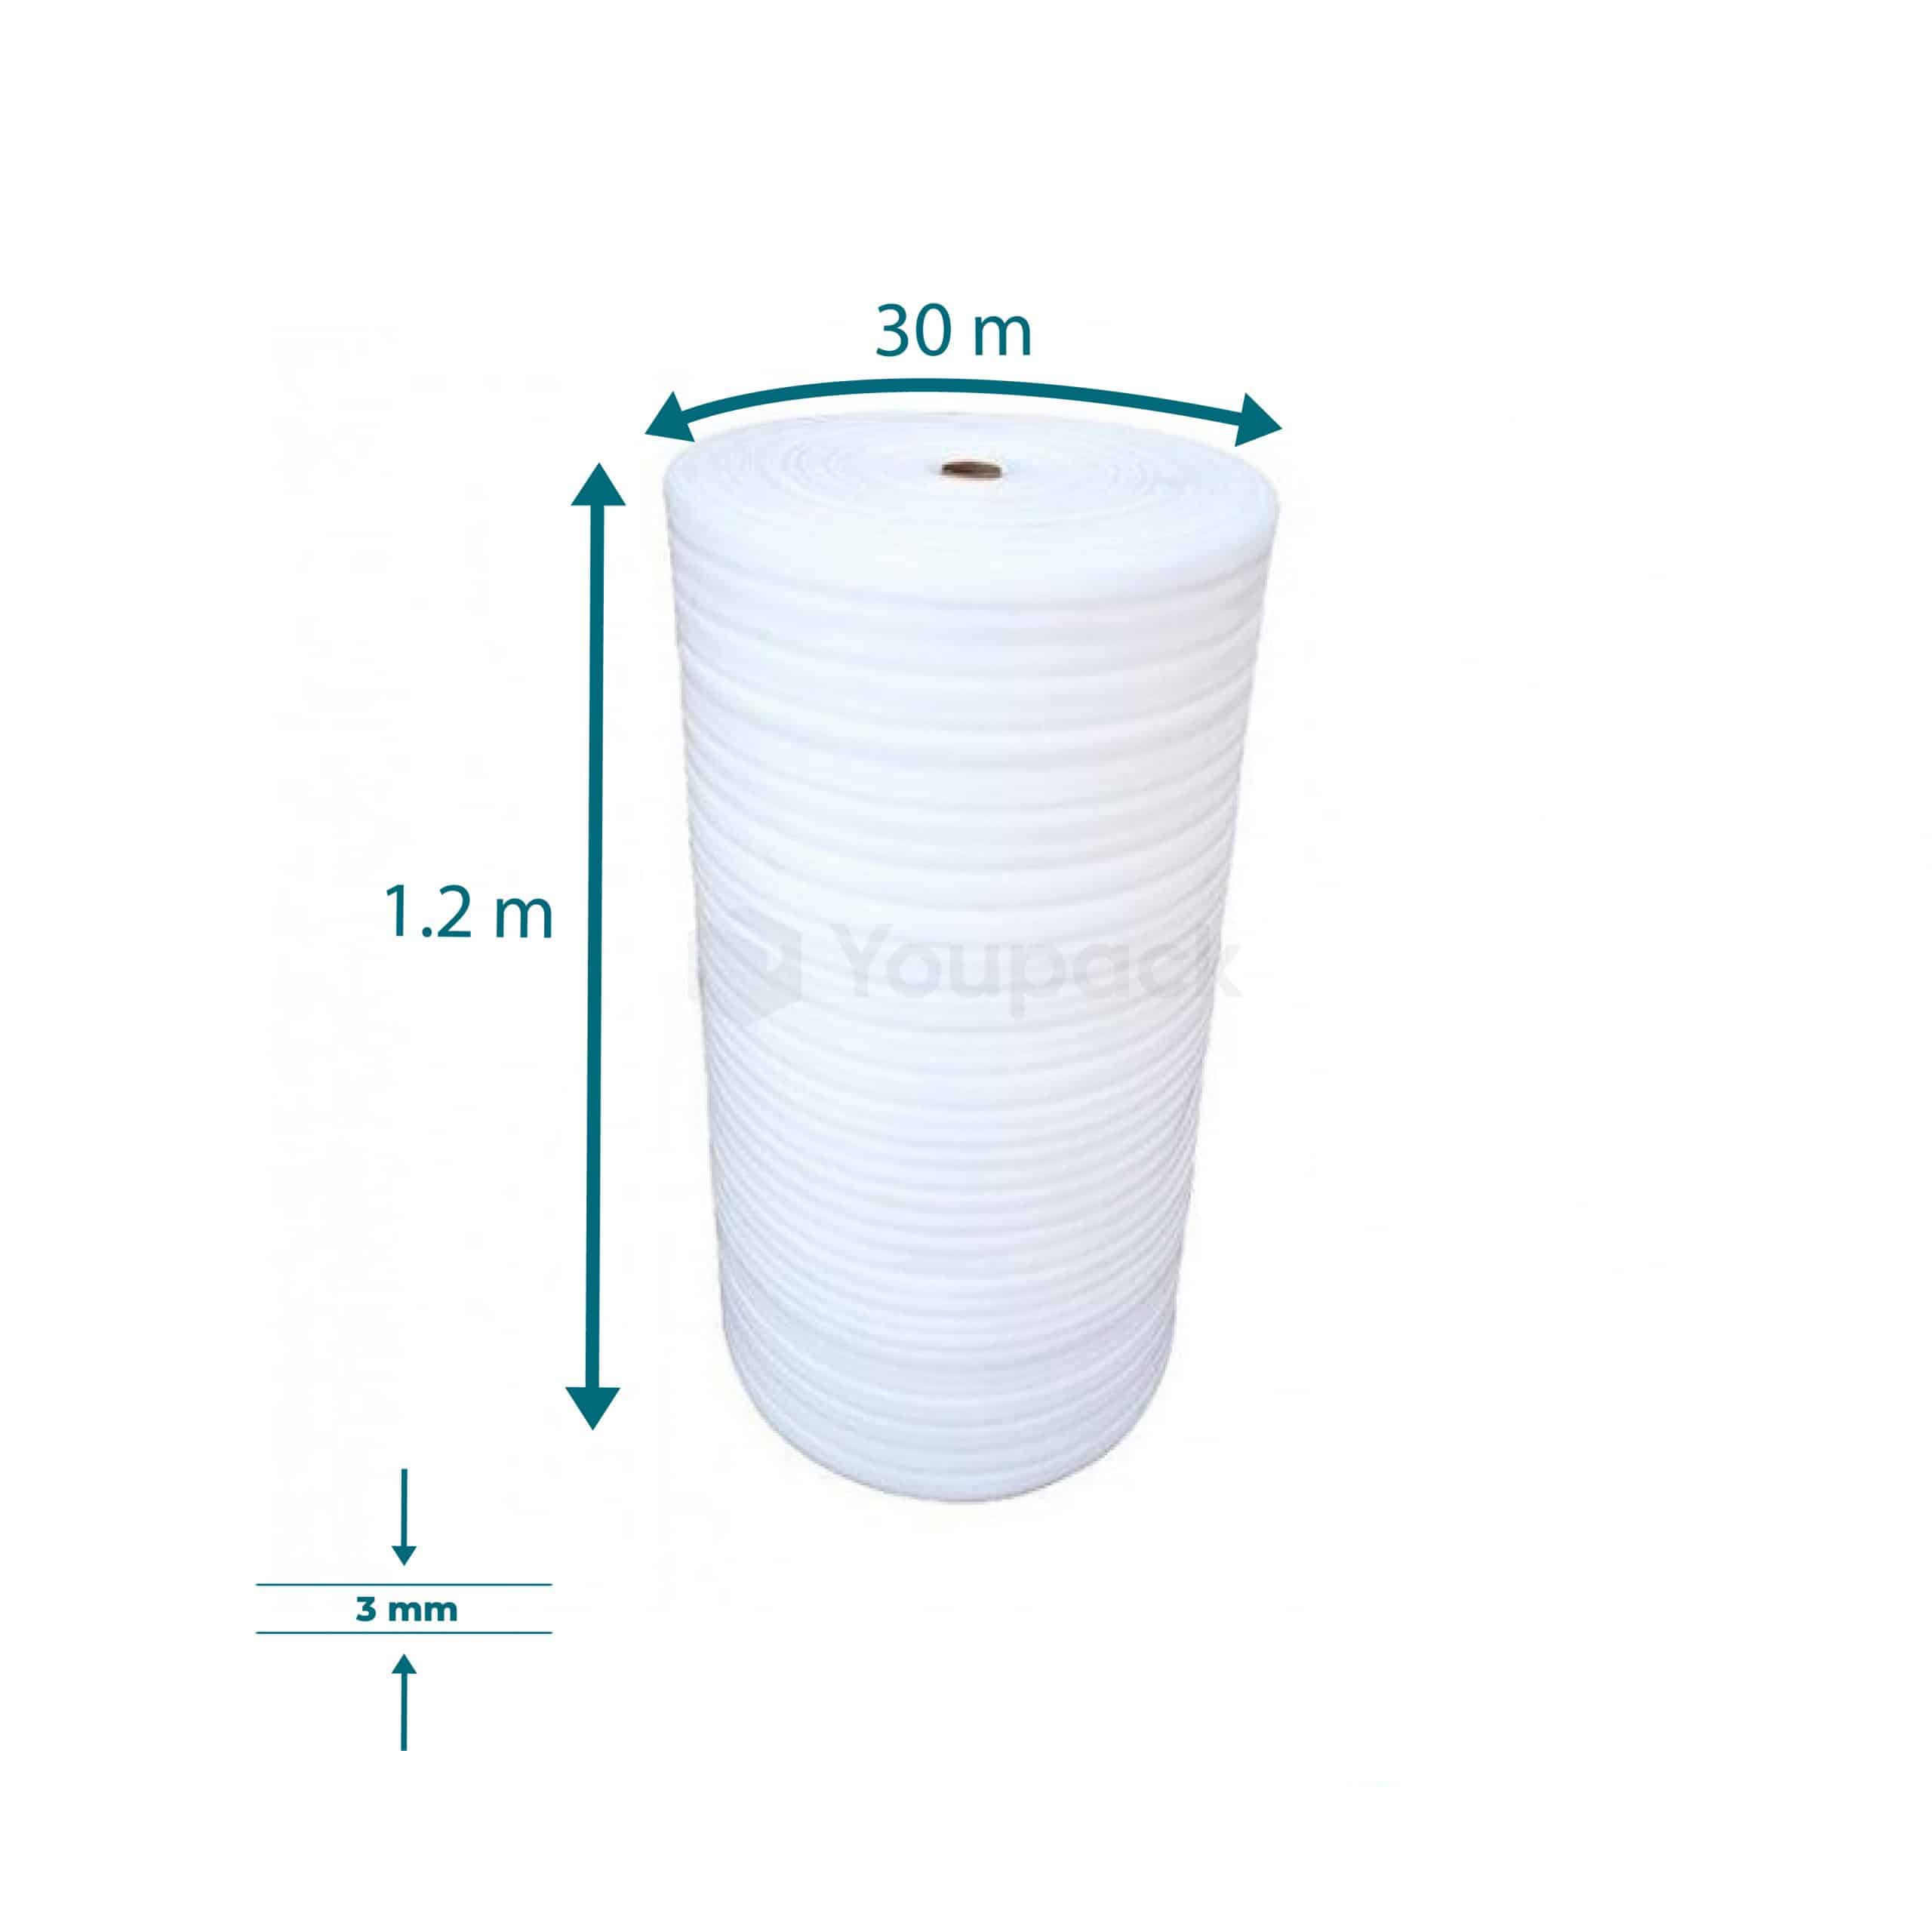 https://www.youpack.ma/wp-content/uploads/2021/02/Mousse-Doufline-3mm-1.2x30m-scaled.jpg